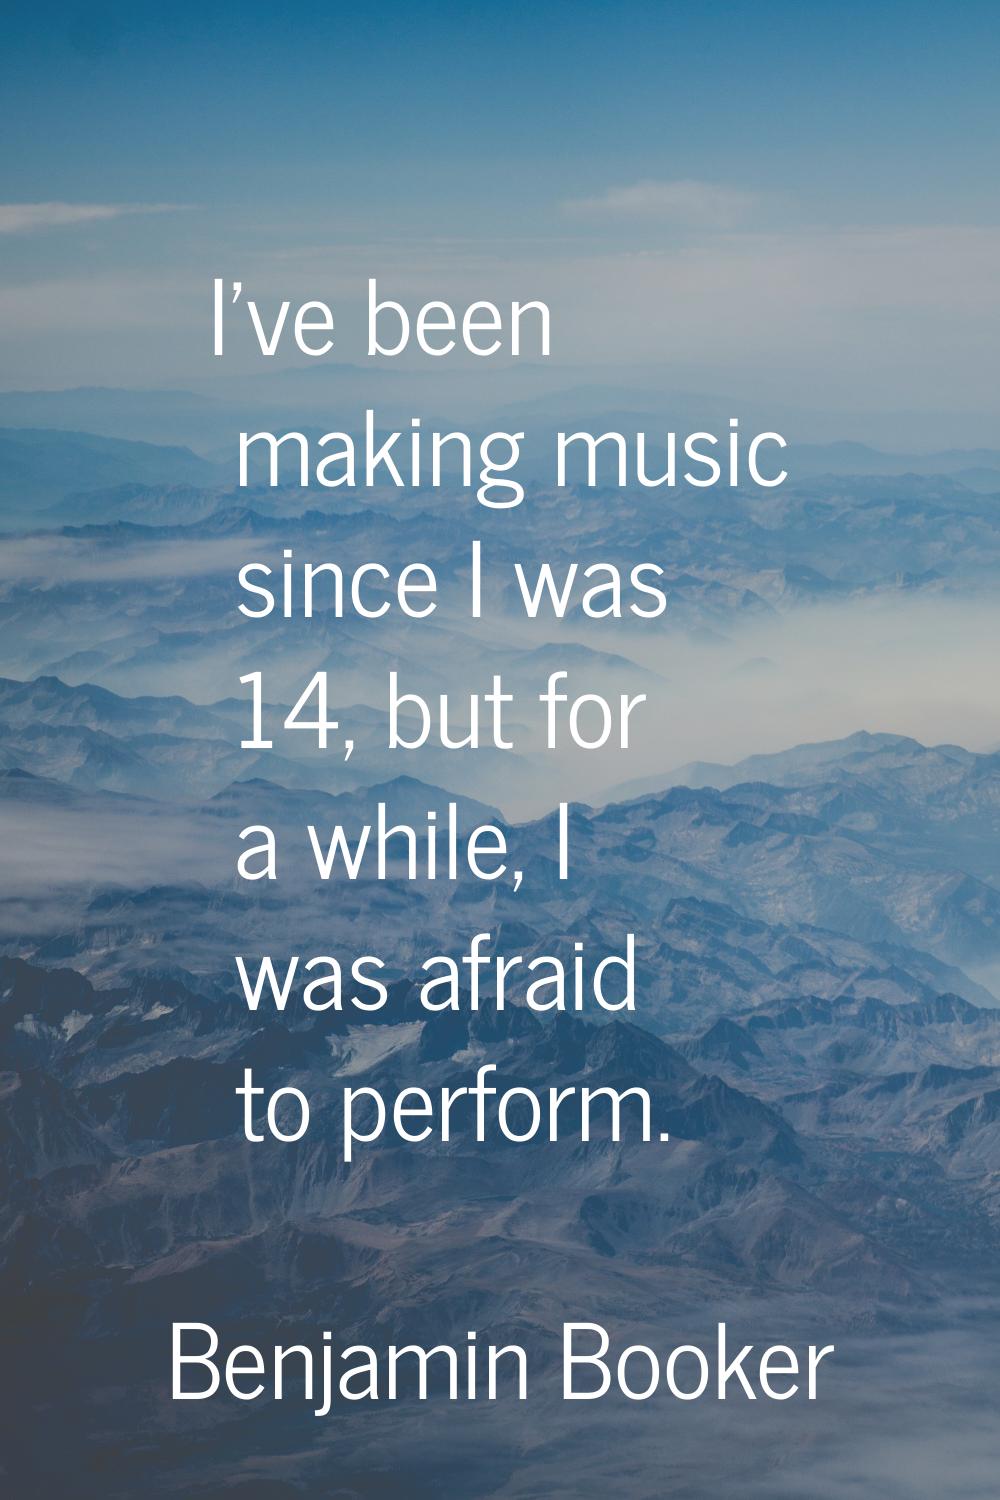 I've been making music since I was 14, but for a while, I was afraid to perform.